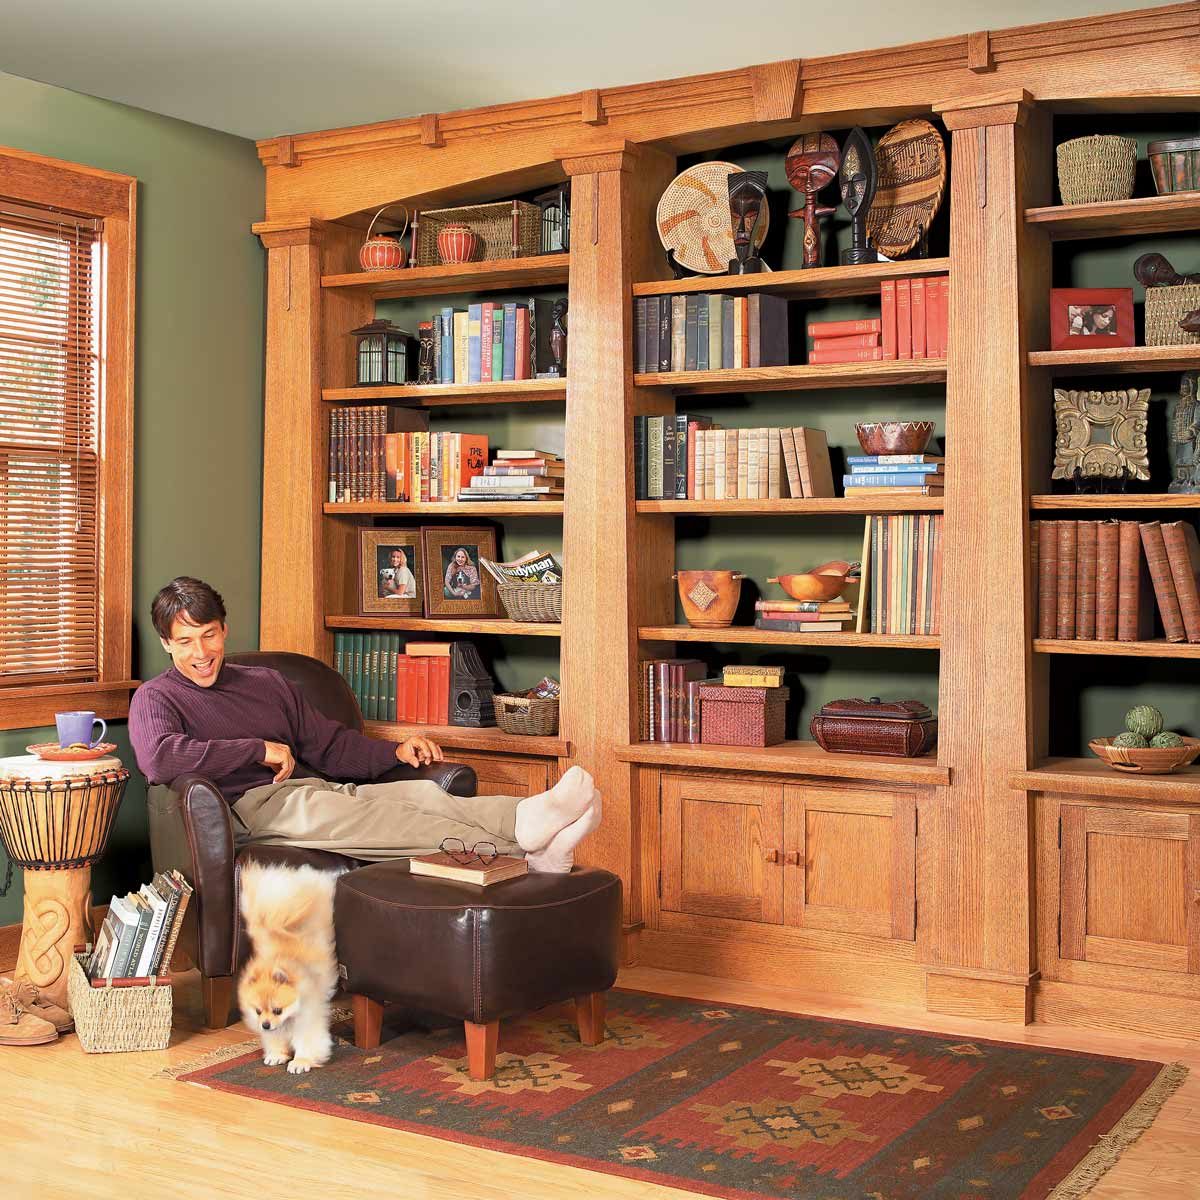 Space Saver: Swap Out Bookcases for Built-in Shelving